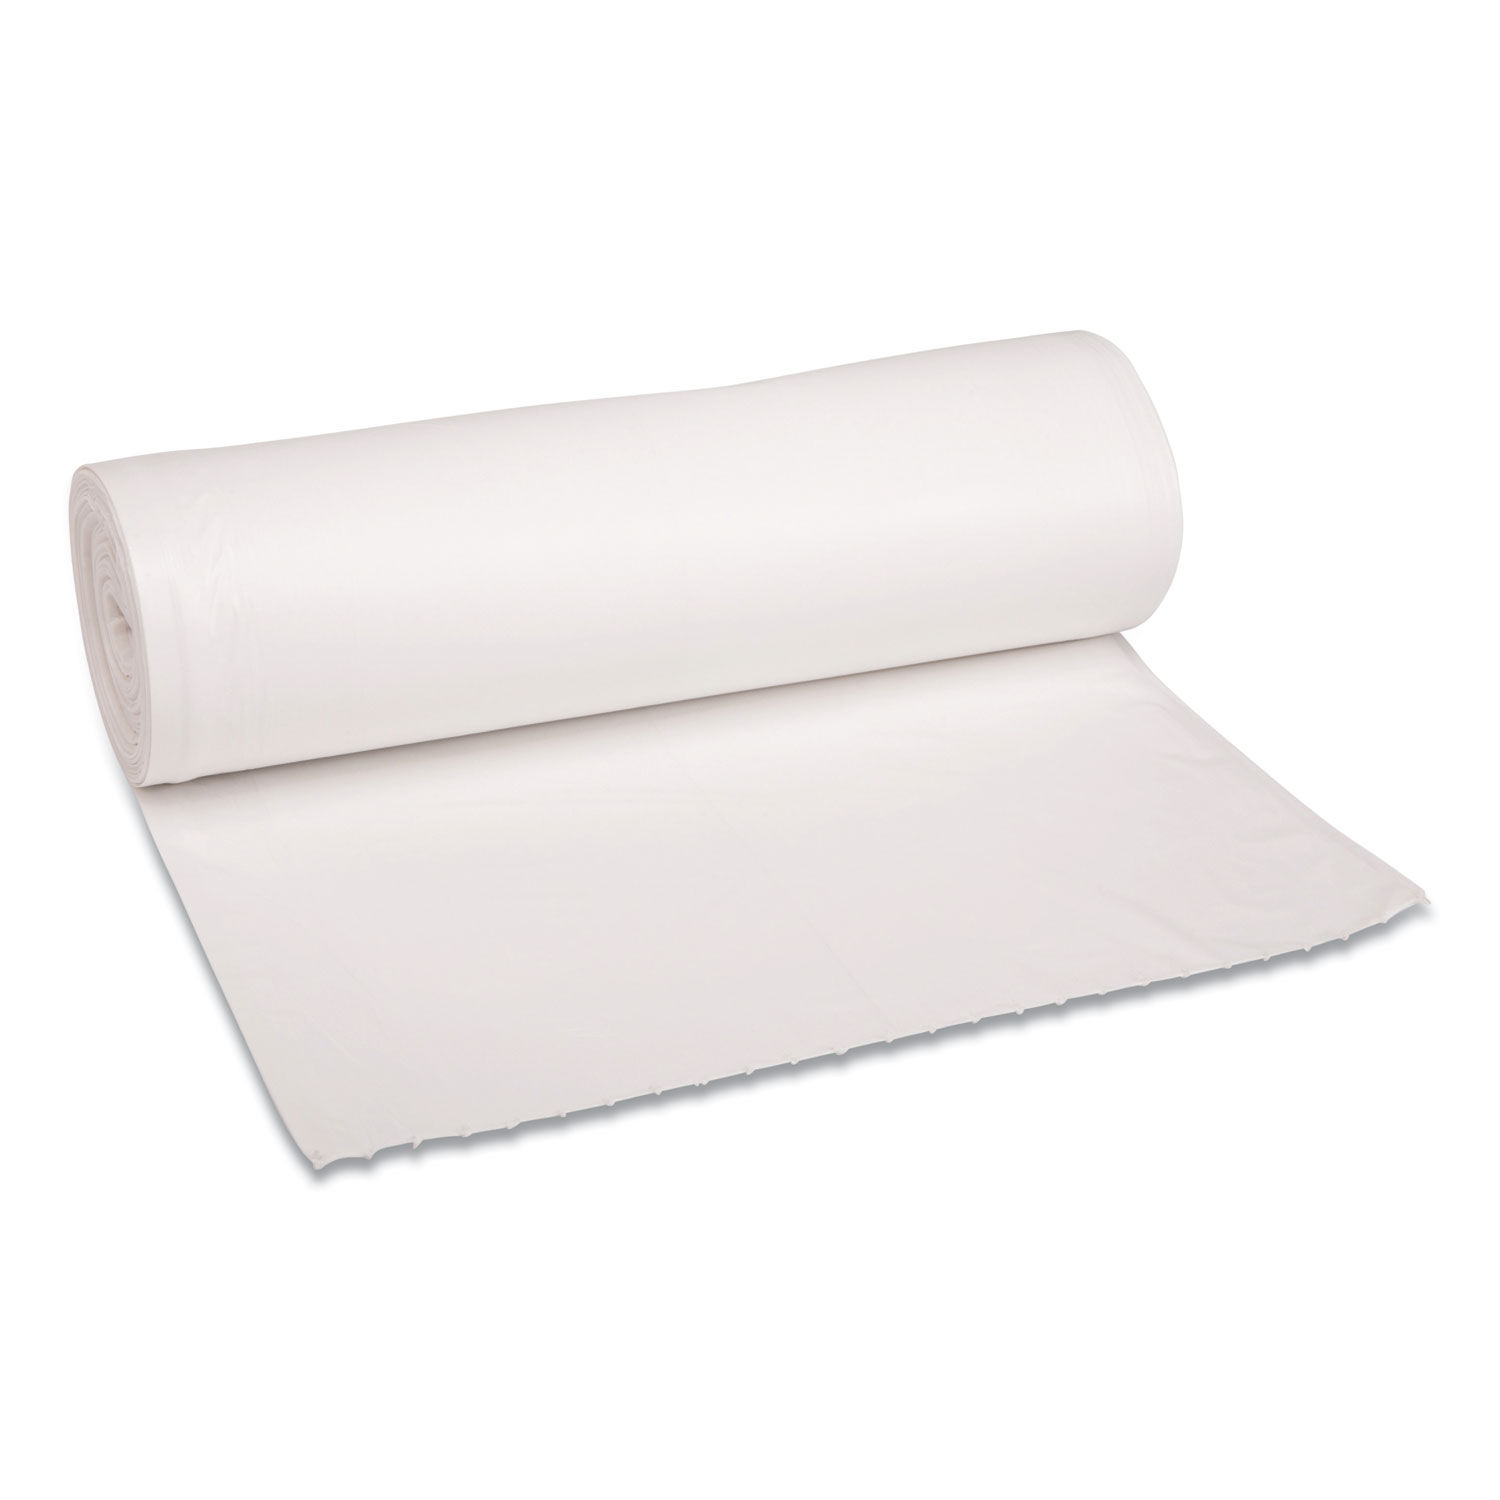 Low-Density Waste Can Liners 60 gal, 0.6 mil, 38" x 58", White, 25 Bags/Roll, 4 Rolls/Carton